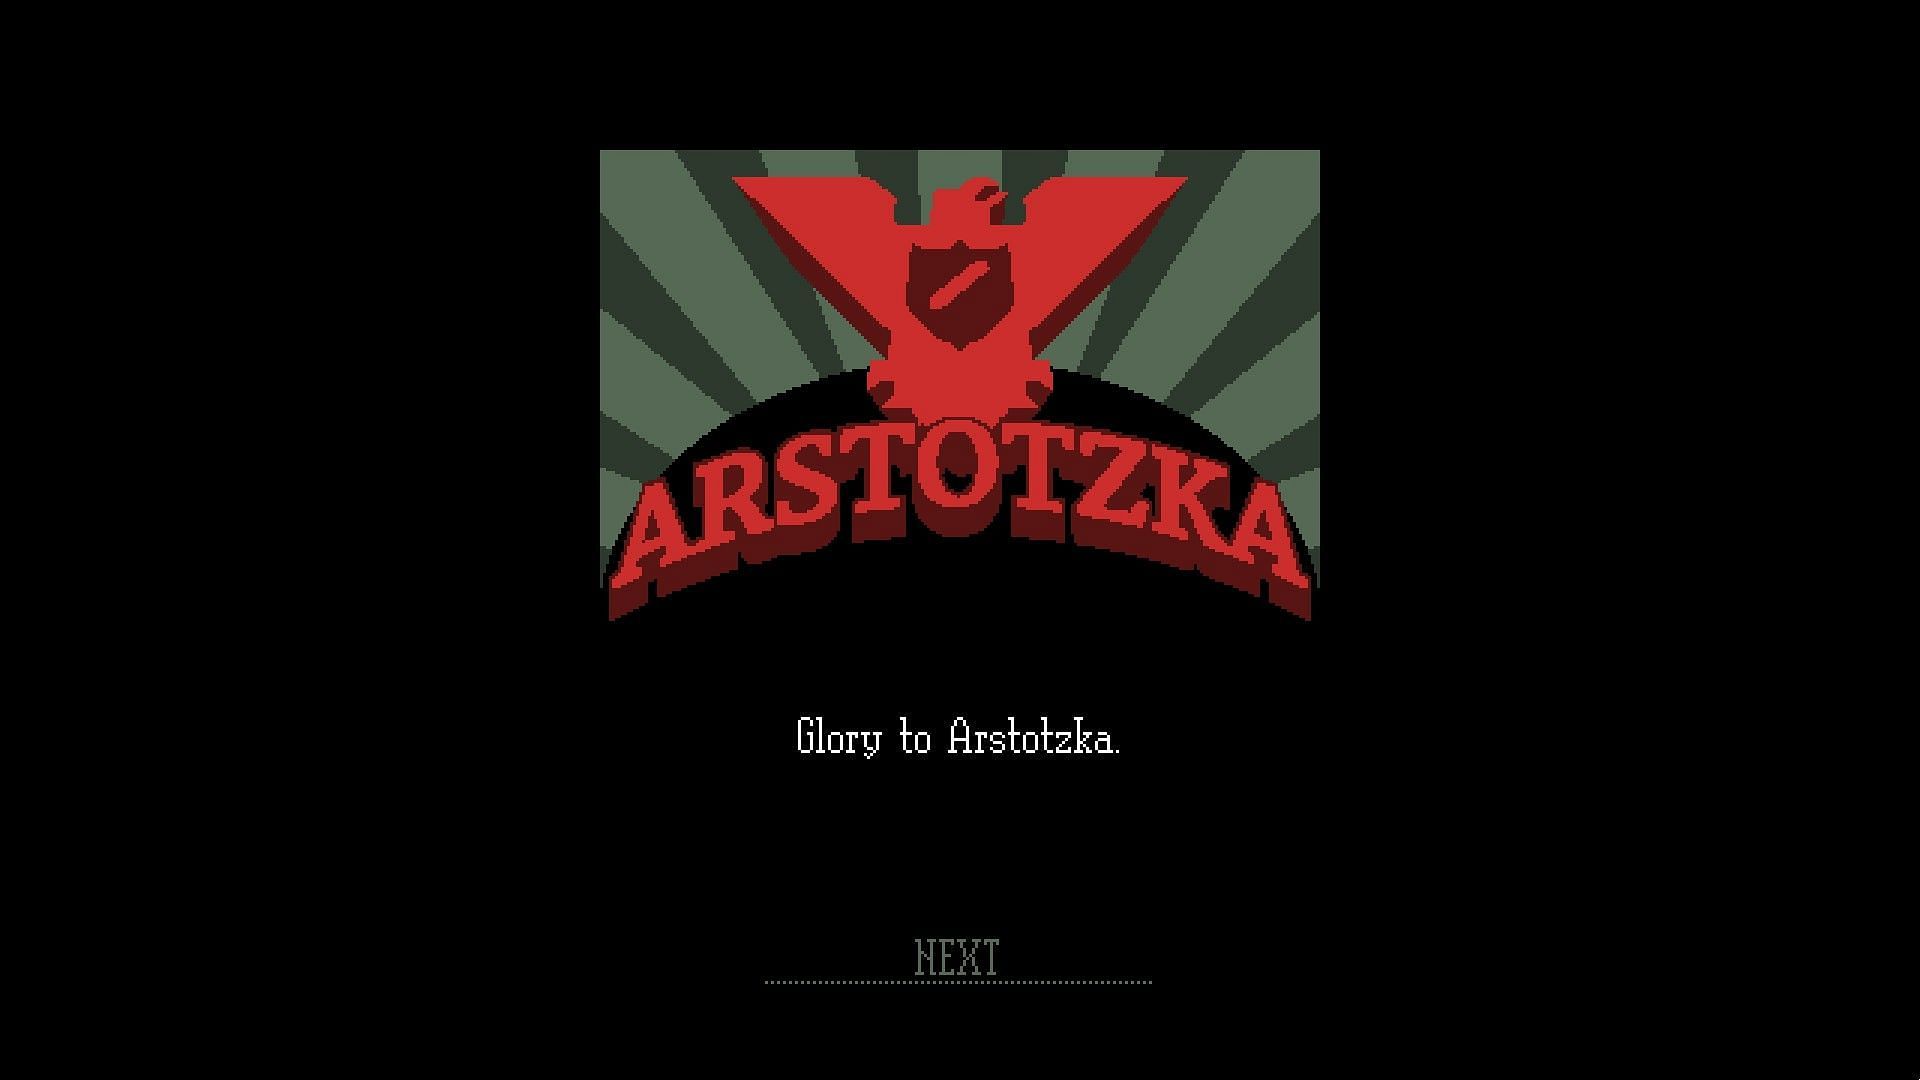 papers please game surgery kolechia